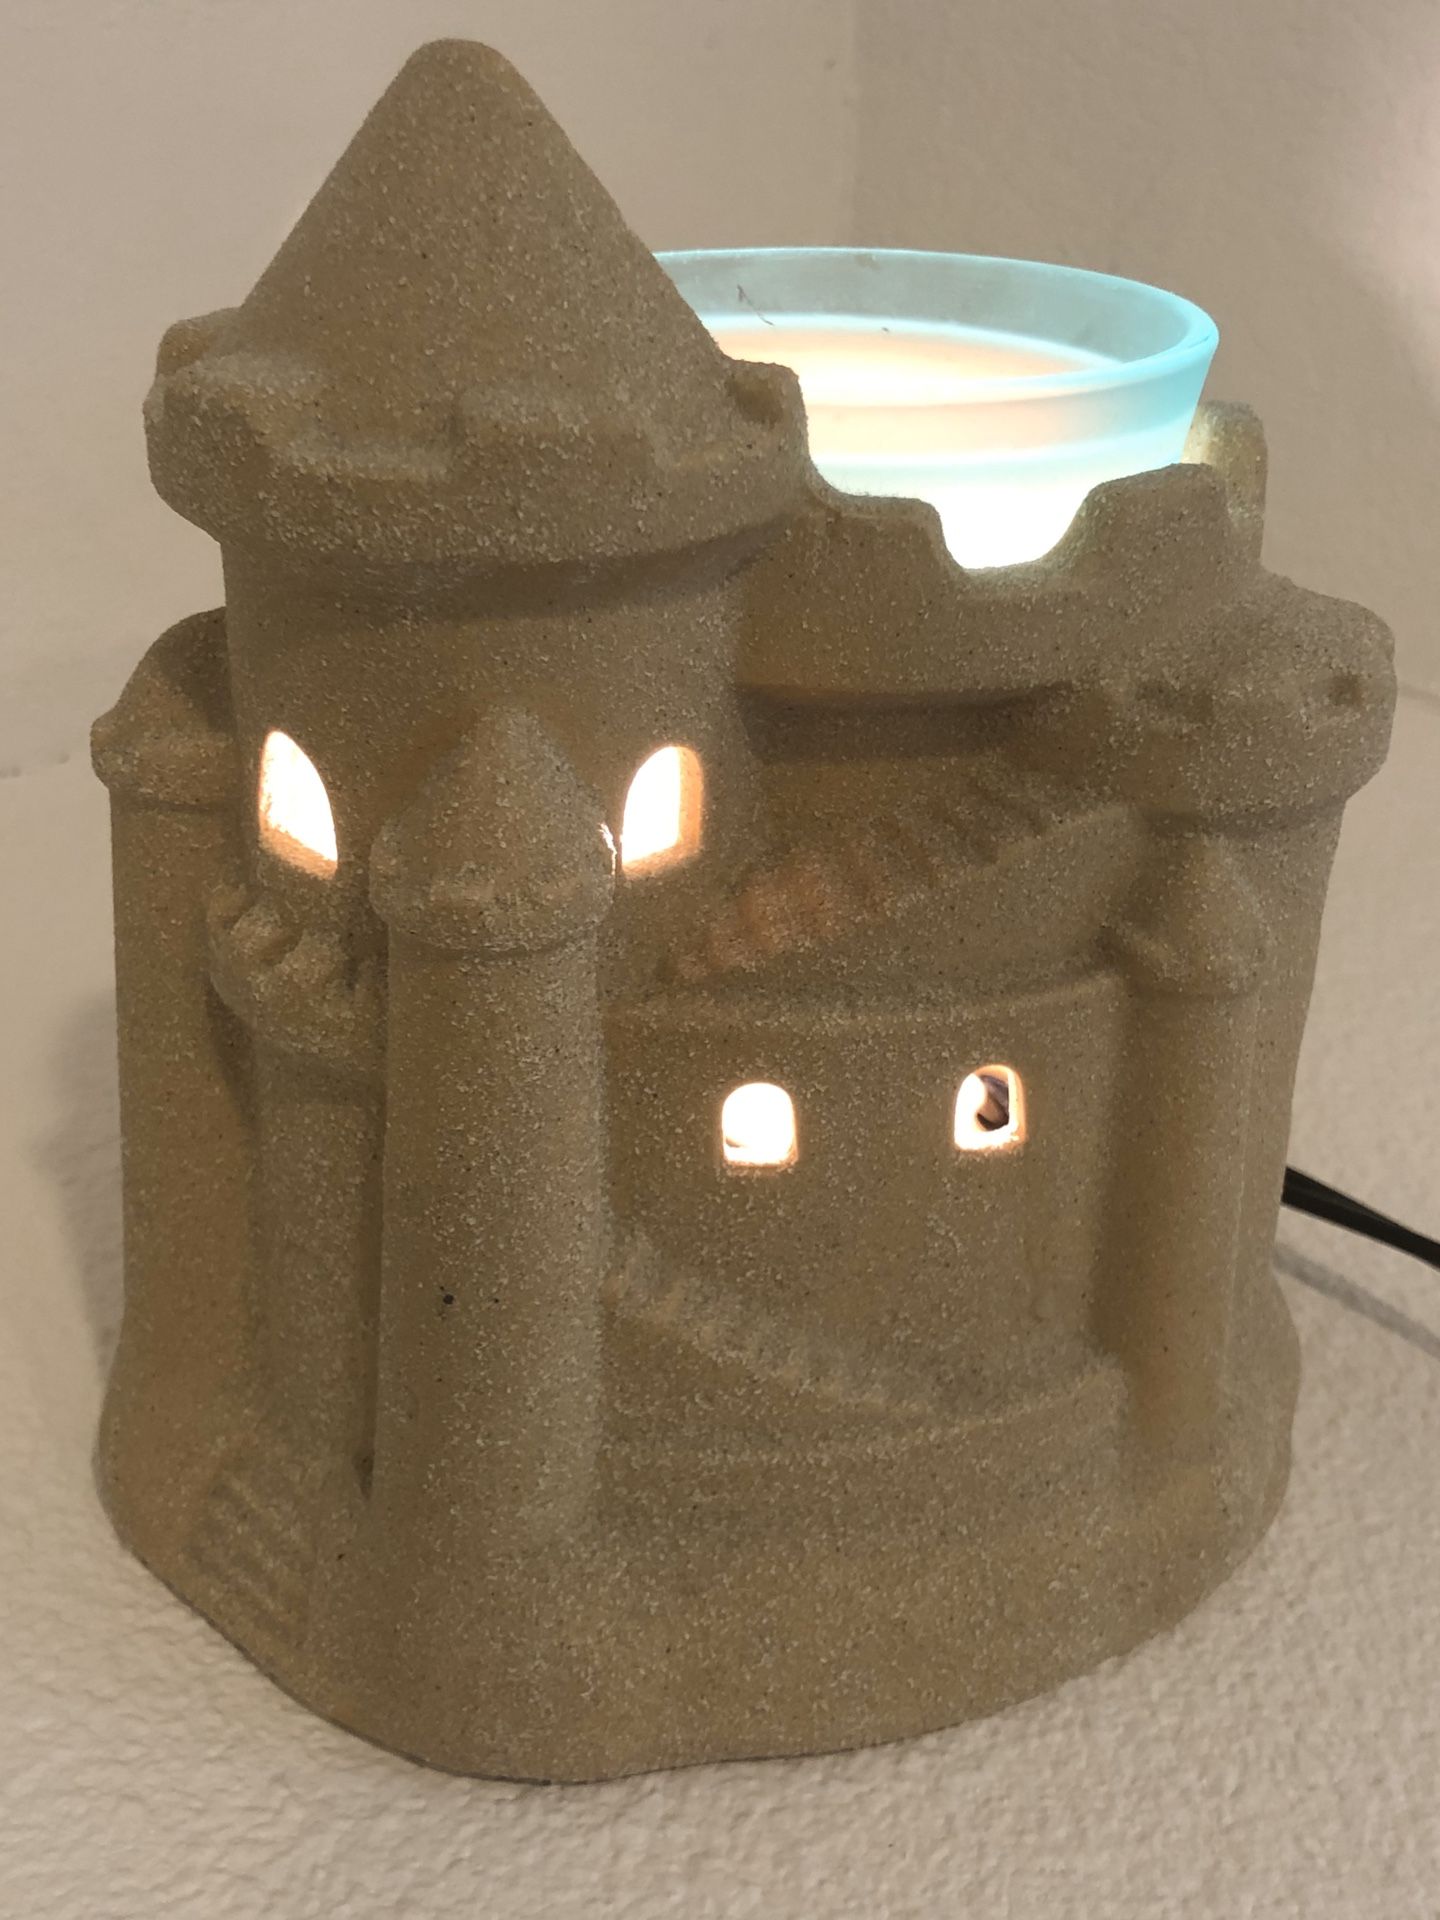 Scentsy Sandcastle Wax Warmer - Pick Up Only